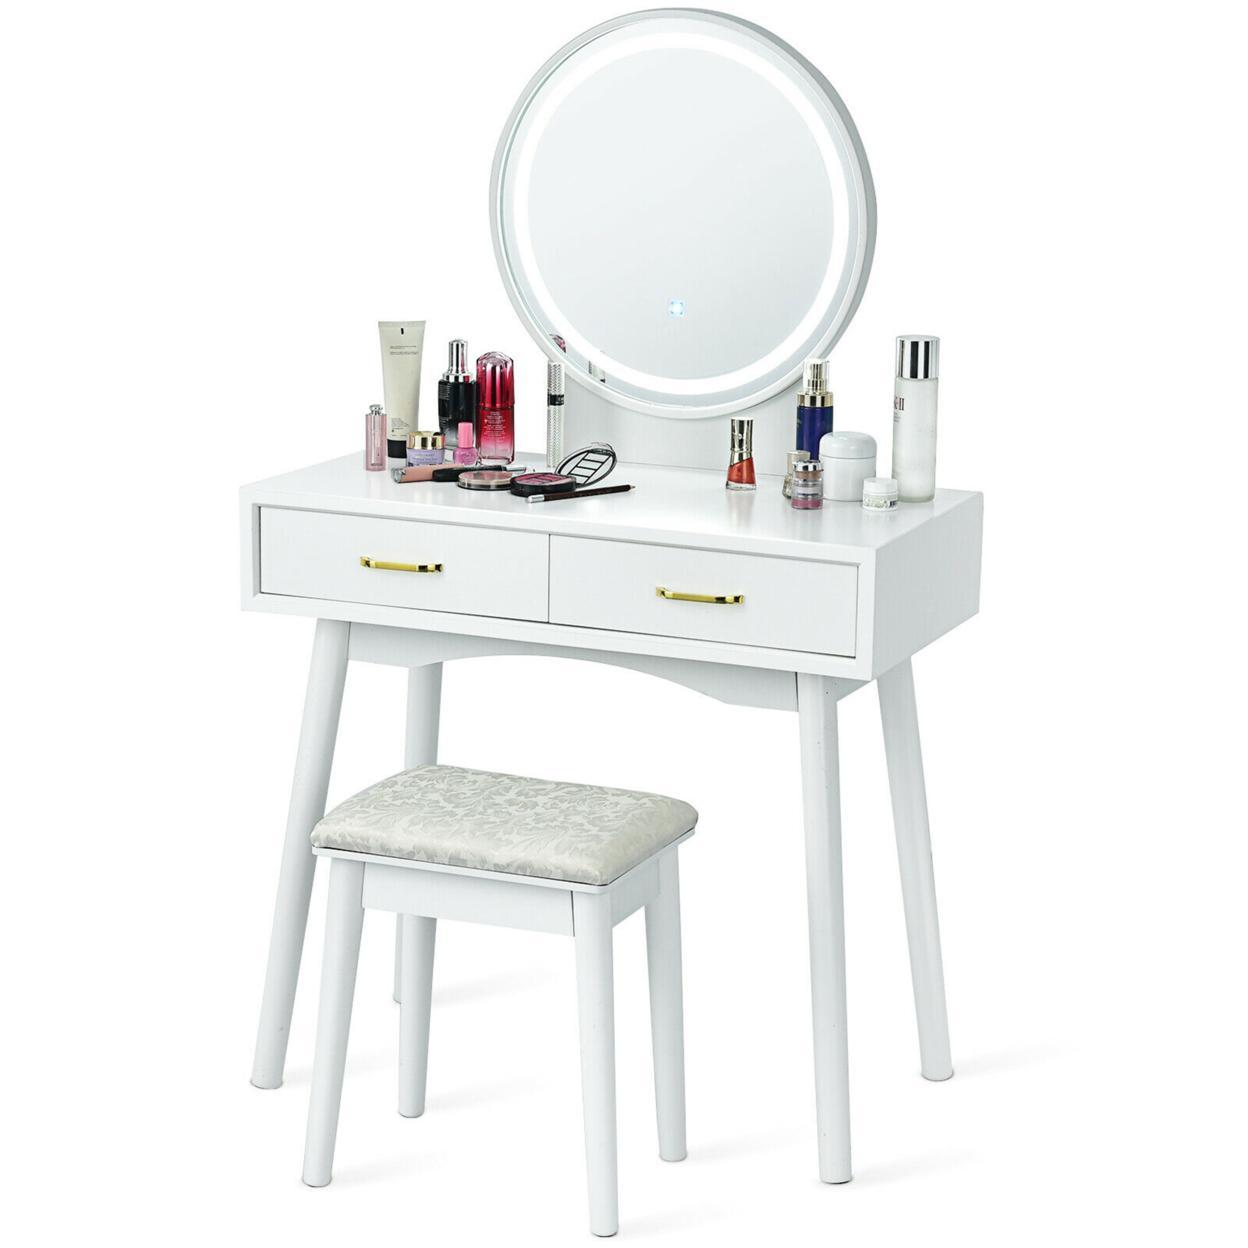 Vanity Dressing Table Set Touch Screen 3 Lighting Modes Mirror Padded Stool